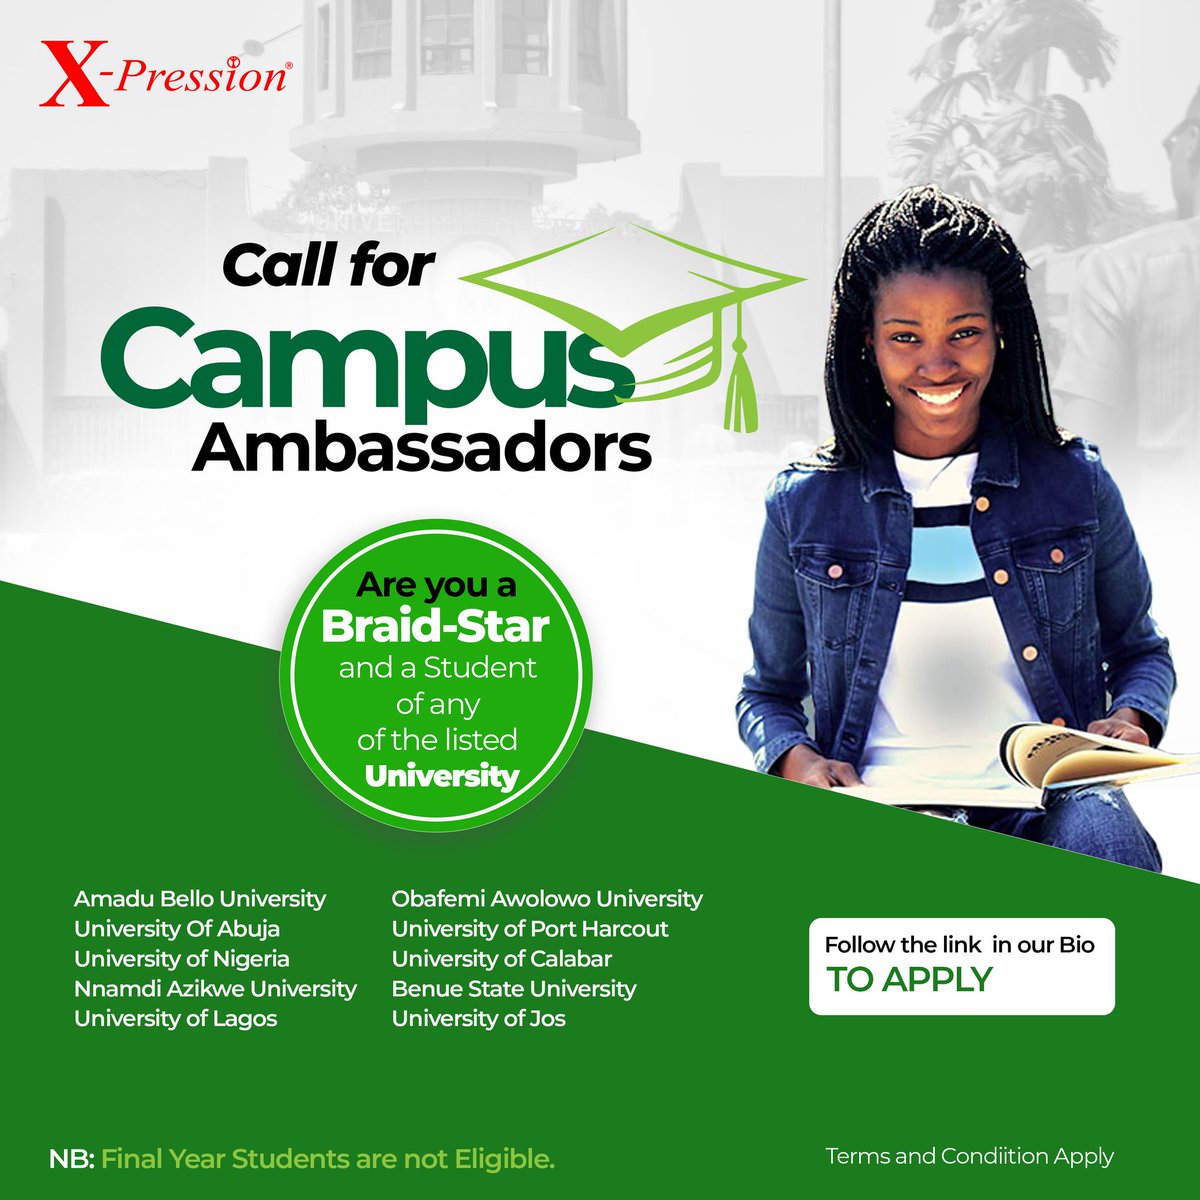 X-PRESSION (@xp4you) SETS TO EMPOWER STUDENT CAMPUS AMBASSADORS IN NIGERIAN UNIVERSITIES!

Follow link and apply 👇

zarmailoaded.com.ng/2023/06/x-pres…

#XPRESSION #UNIVERSITY #ZARMAILOADED